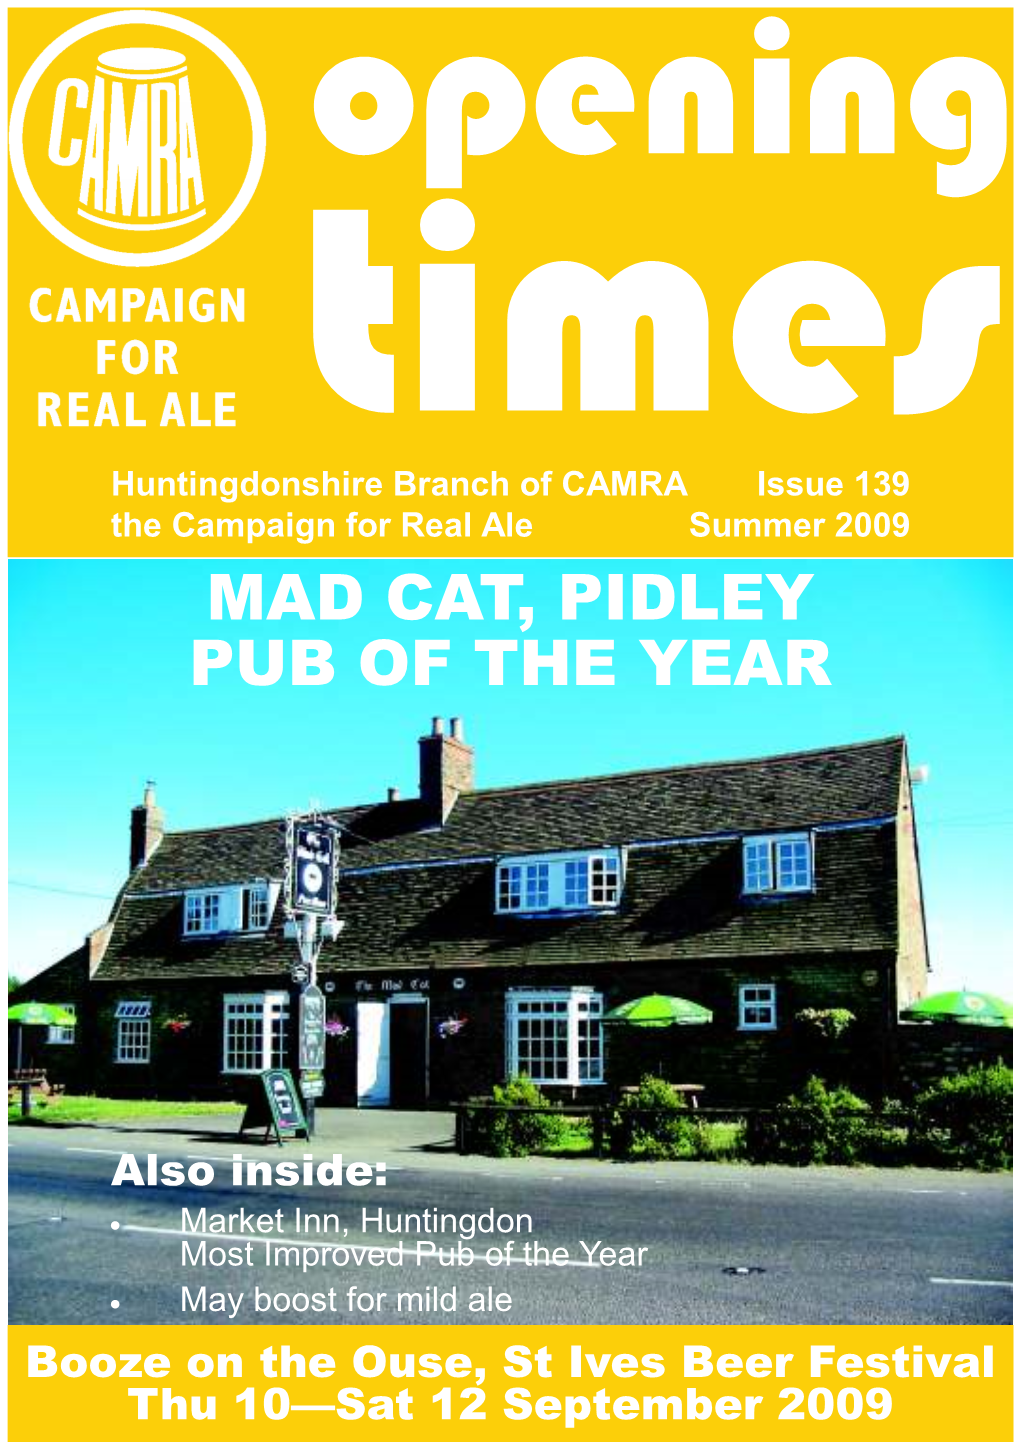 Mad Cat, Pidley Pub of the Year